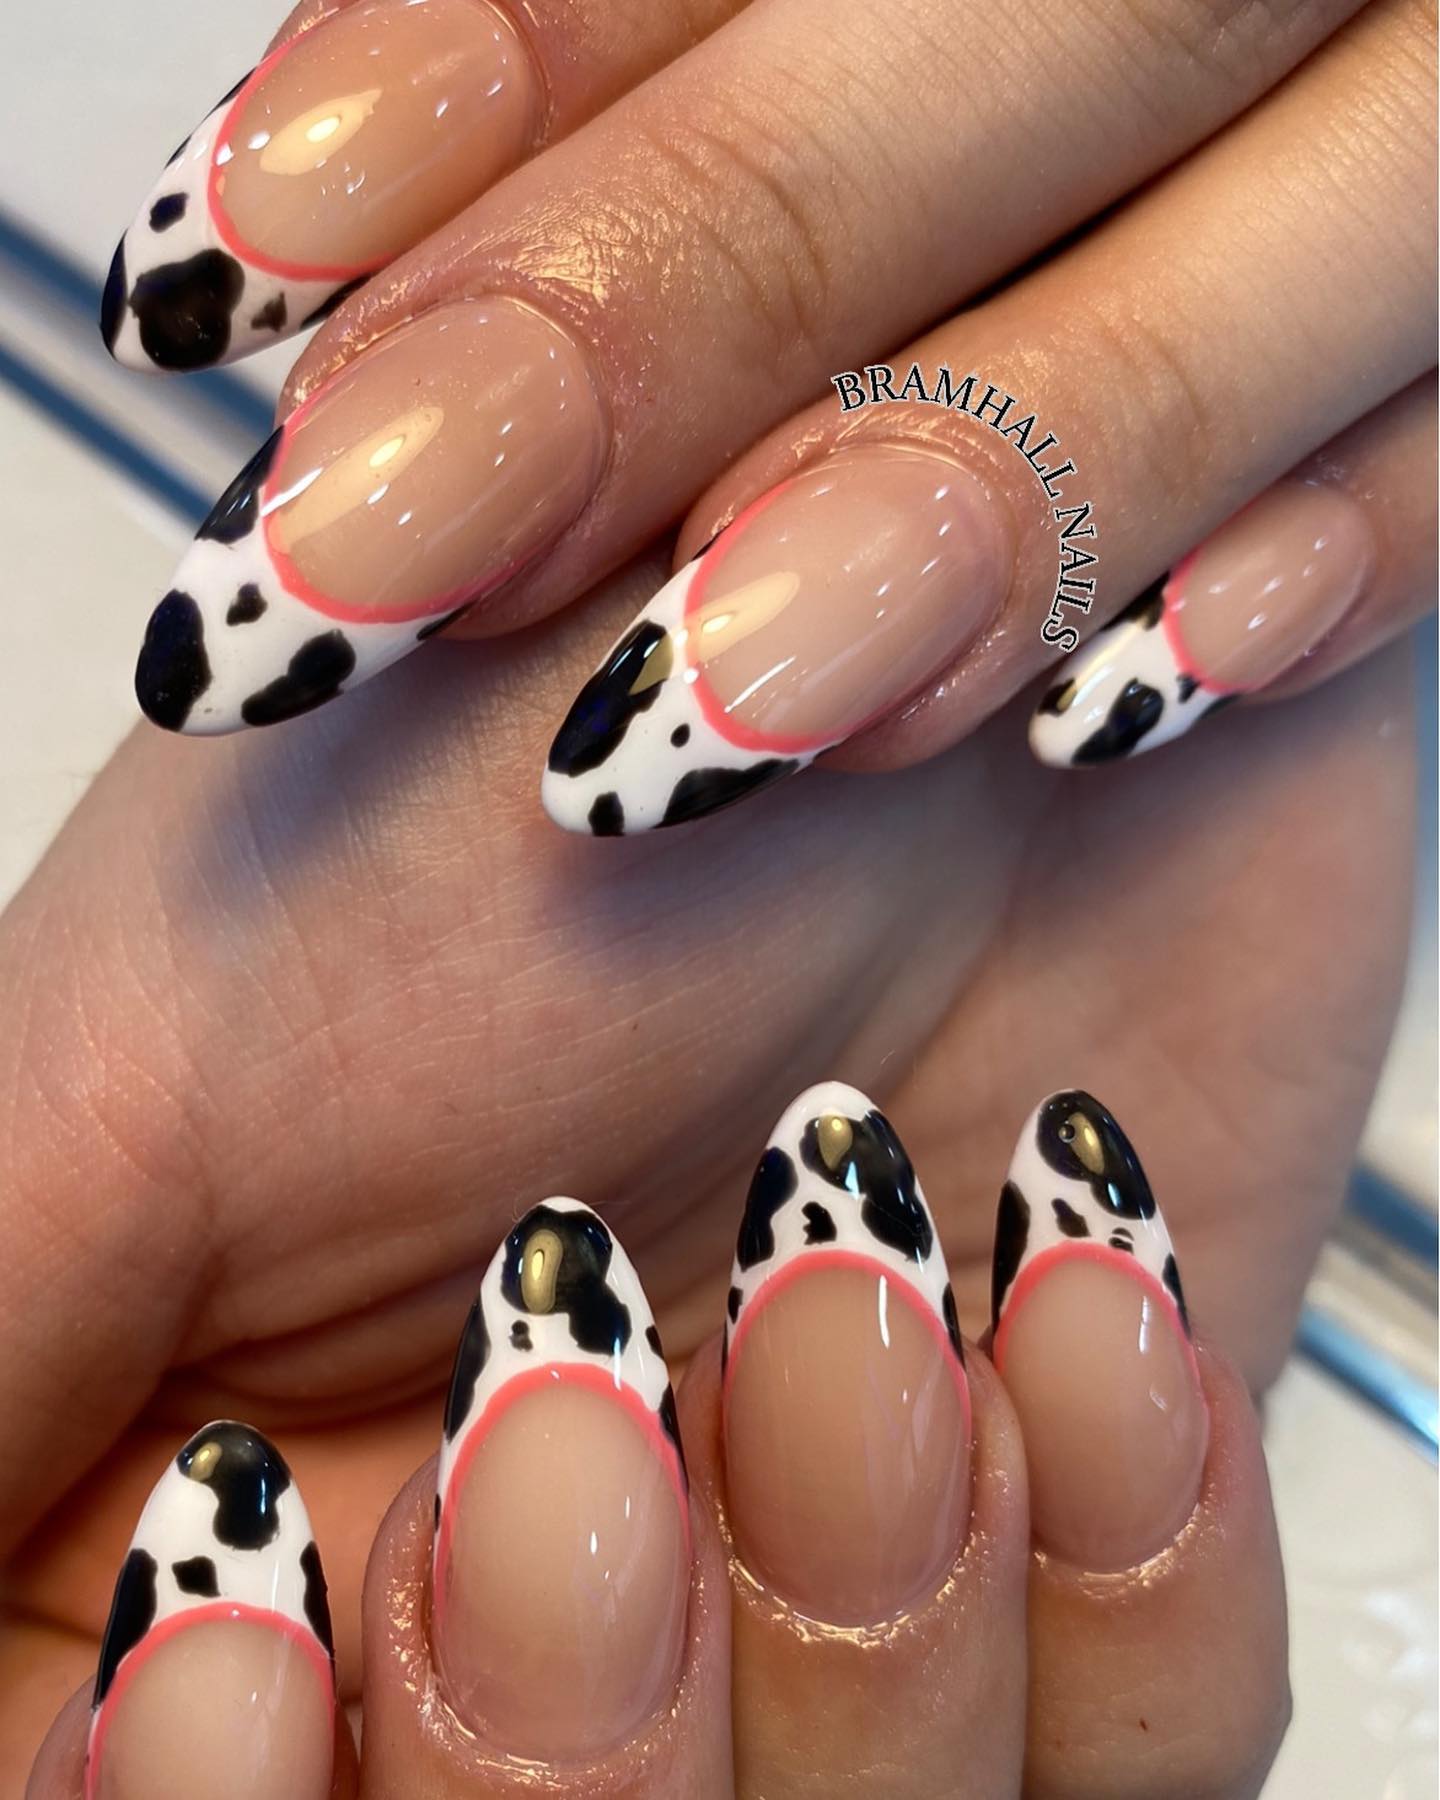 Using cow print nail art on your tips is a great way to add some fun to your look, but still keep it classy. Between the nude nail polish and cow print tips, a reddish color is used to take this mani to a whole different level because it looks amazing!